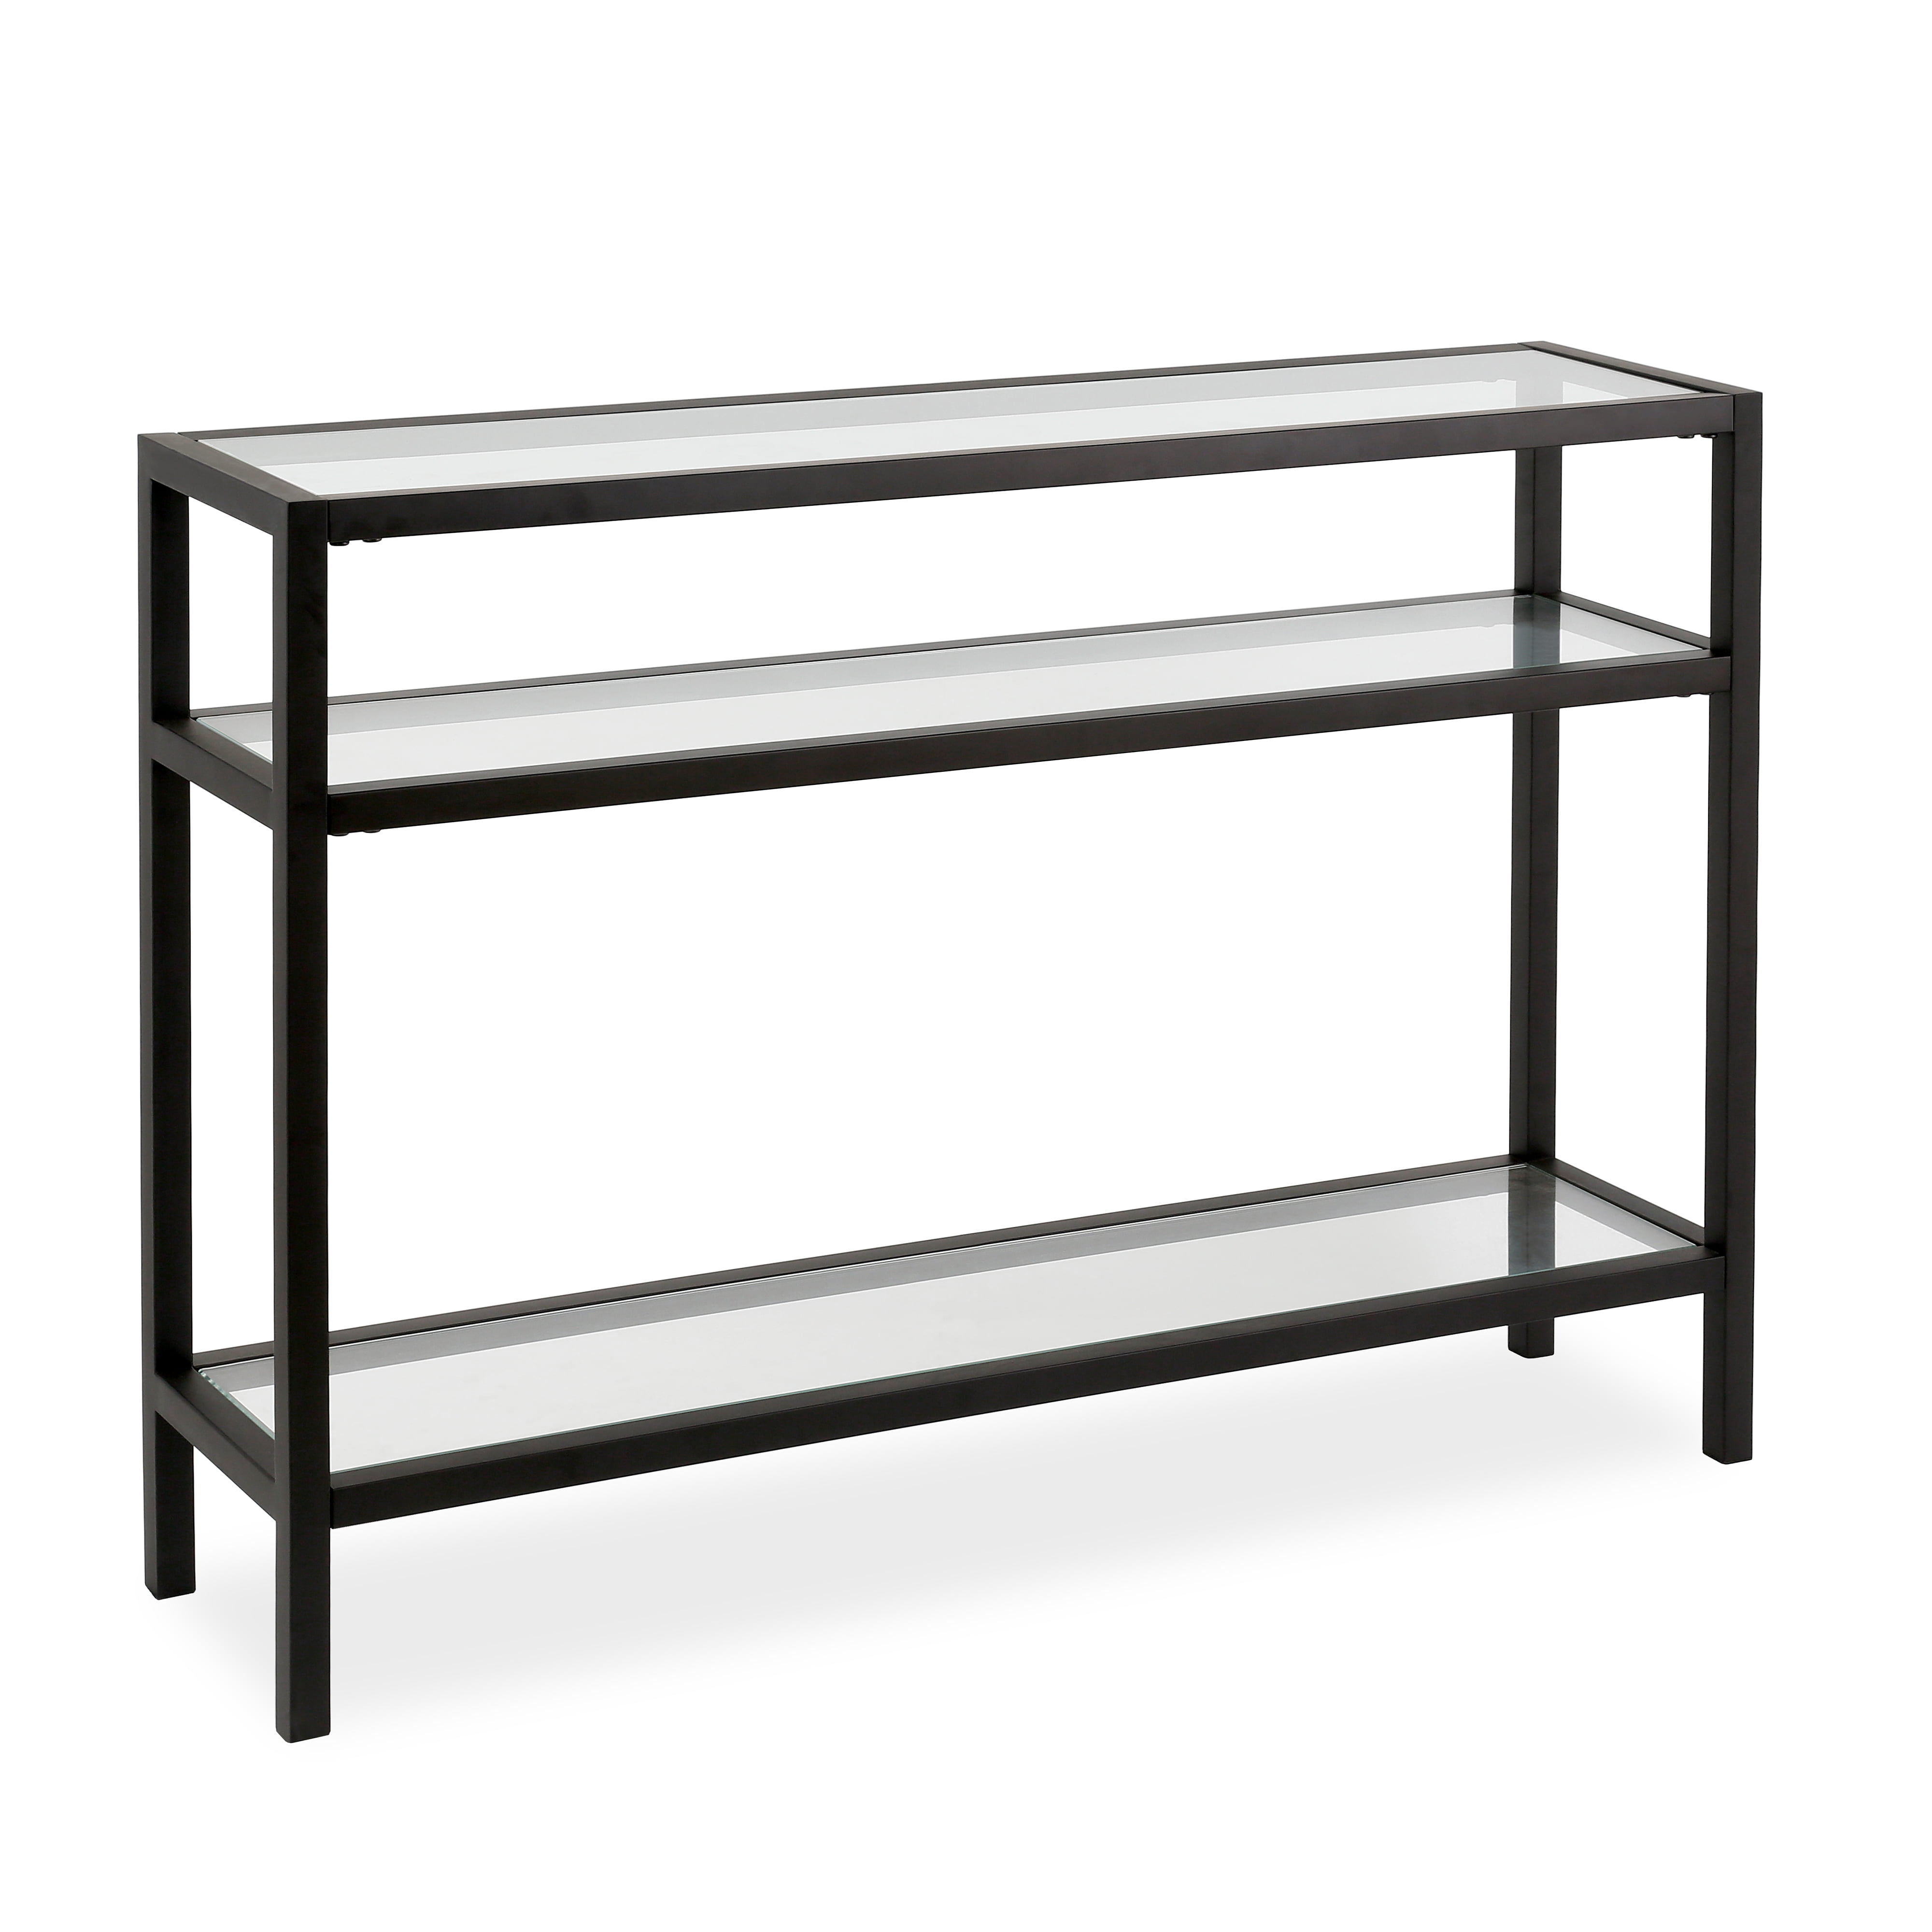 Evelyn Zoe Contemporary Metal Console, Black Metal Sofa Table With Glass Top